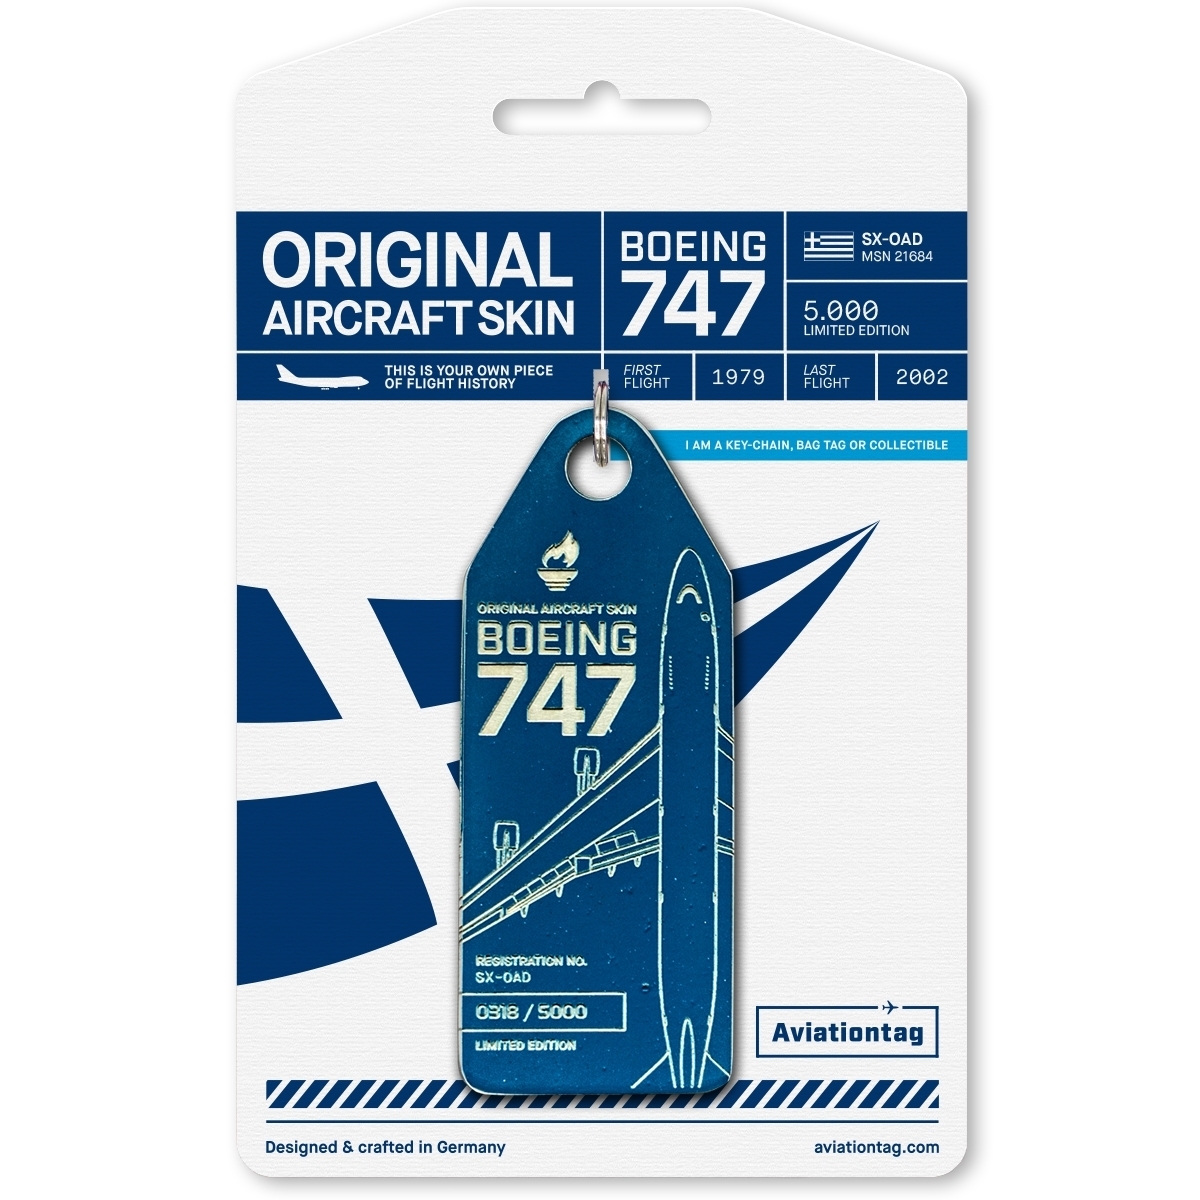 Aviationtag Olympic Airways - Boeing 747 - SX-OAD Blue